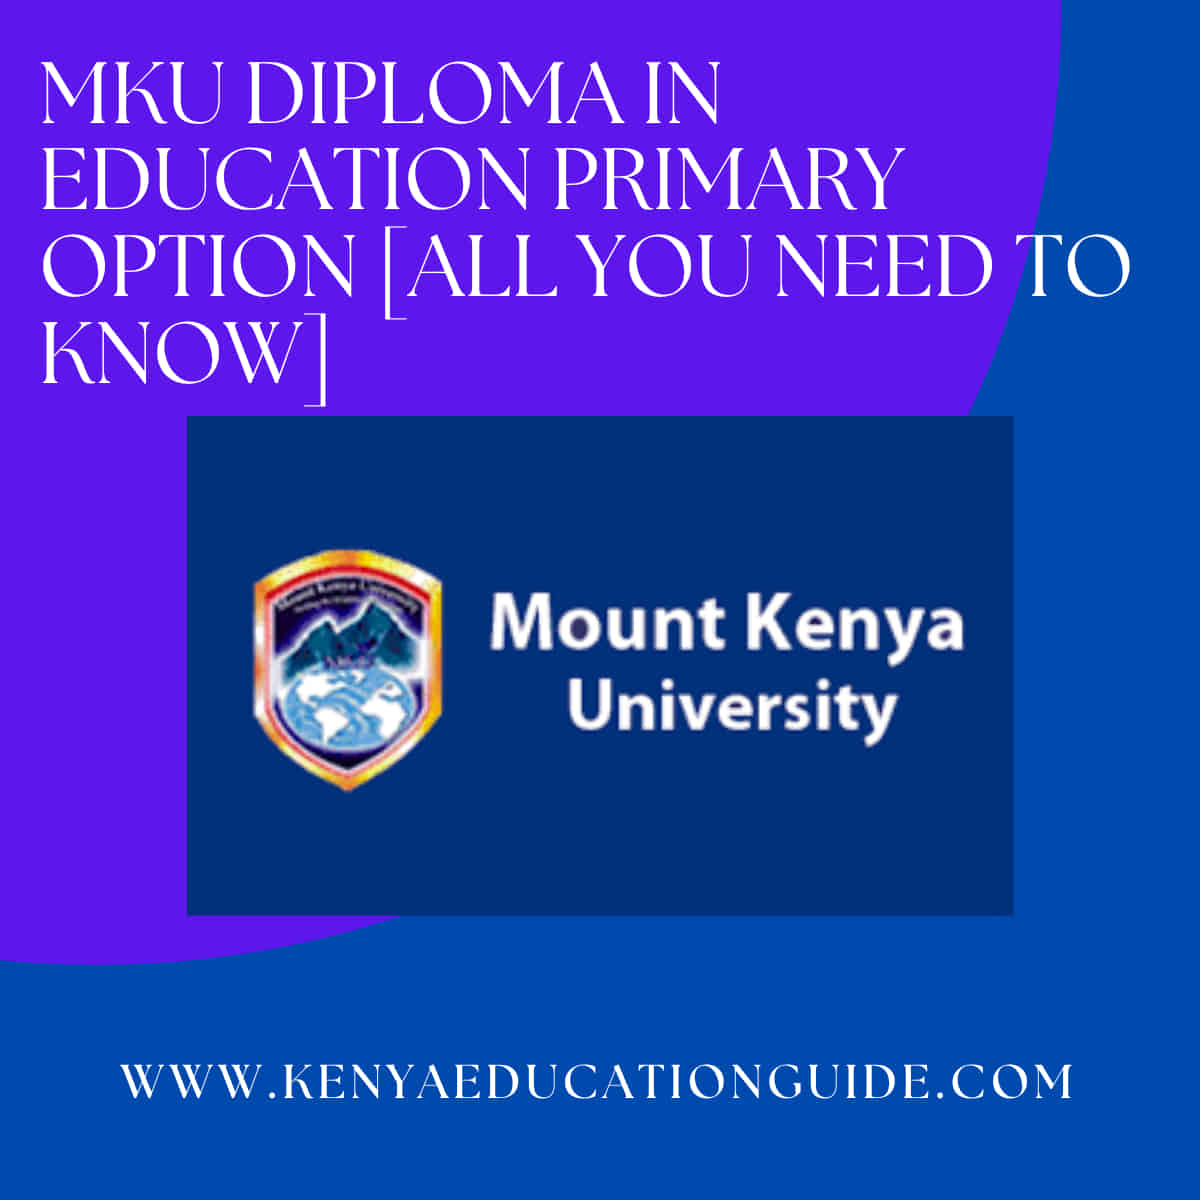 MKU diploma in education primary option